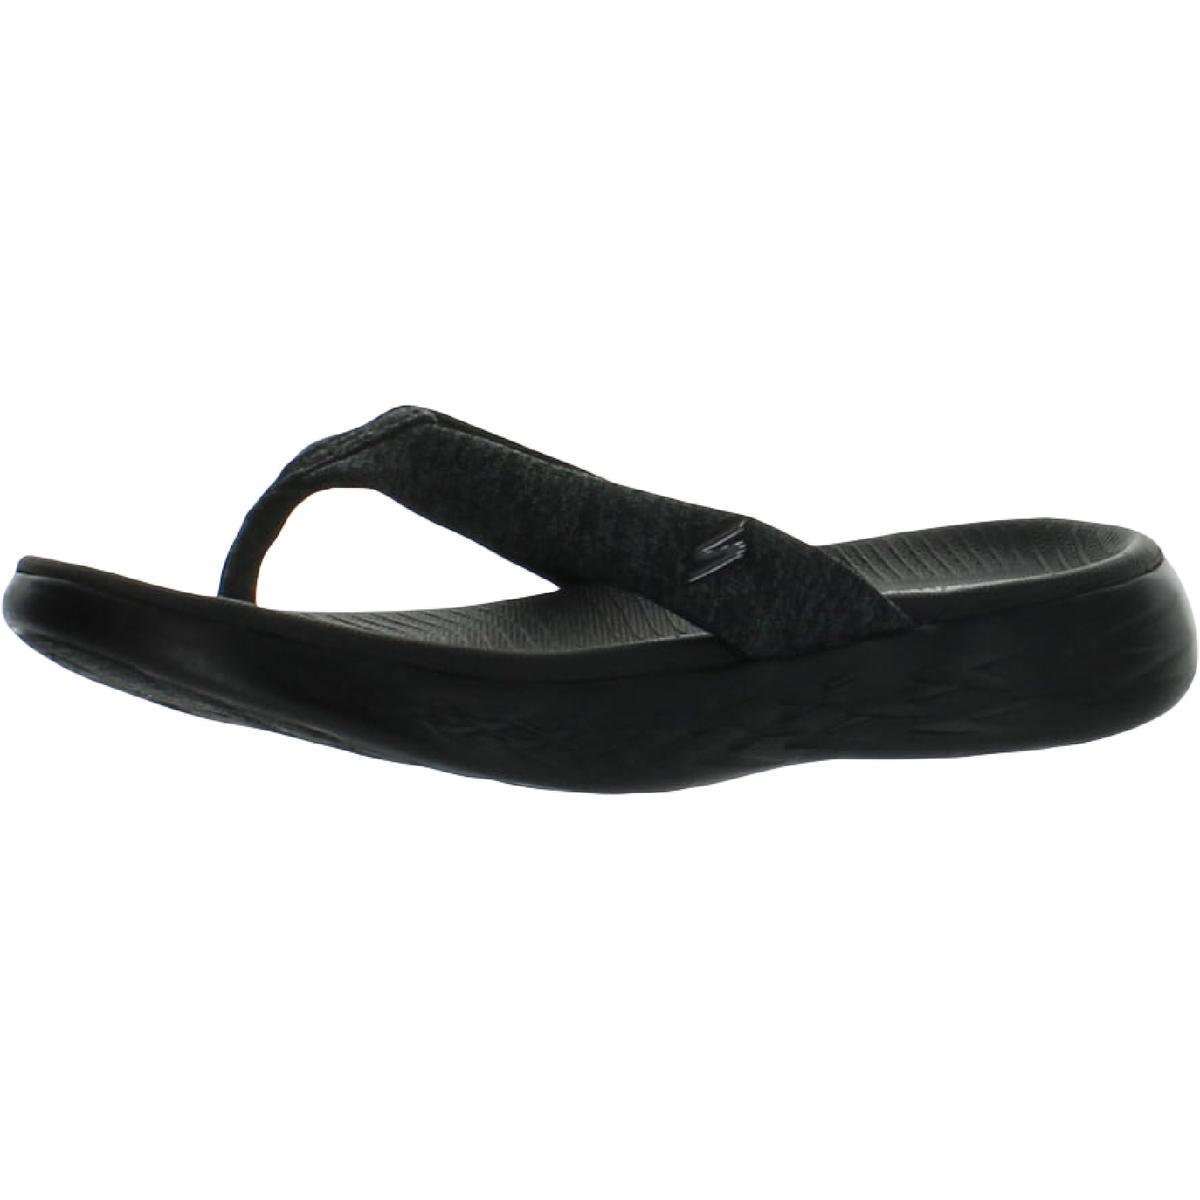 Skechers Womens Slip On Padded Insole Outdoors Slide Sandals Shoes Bhfo 6580 Black